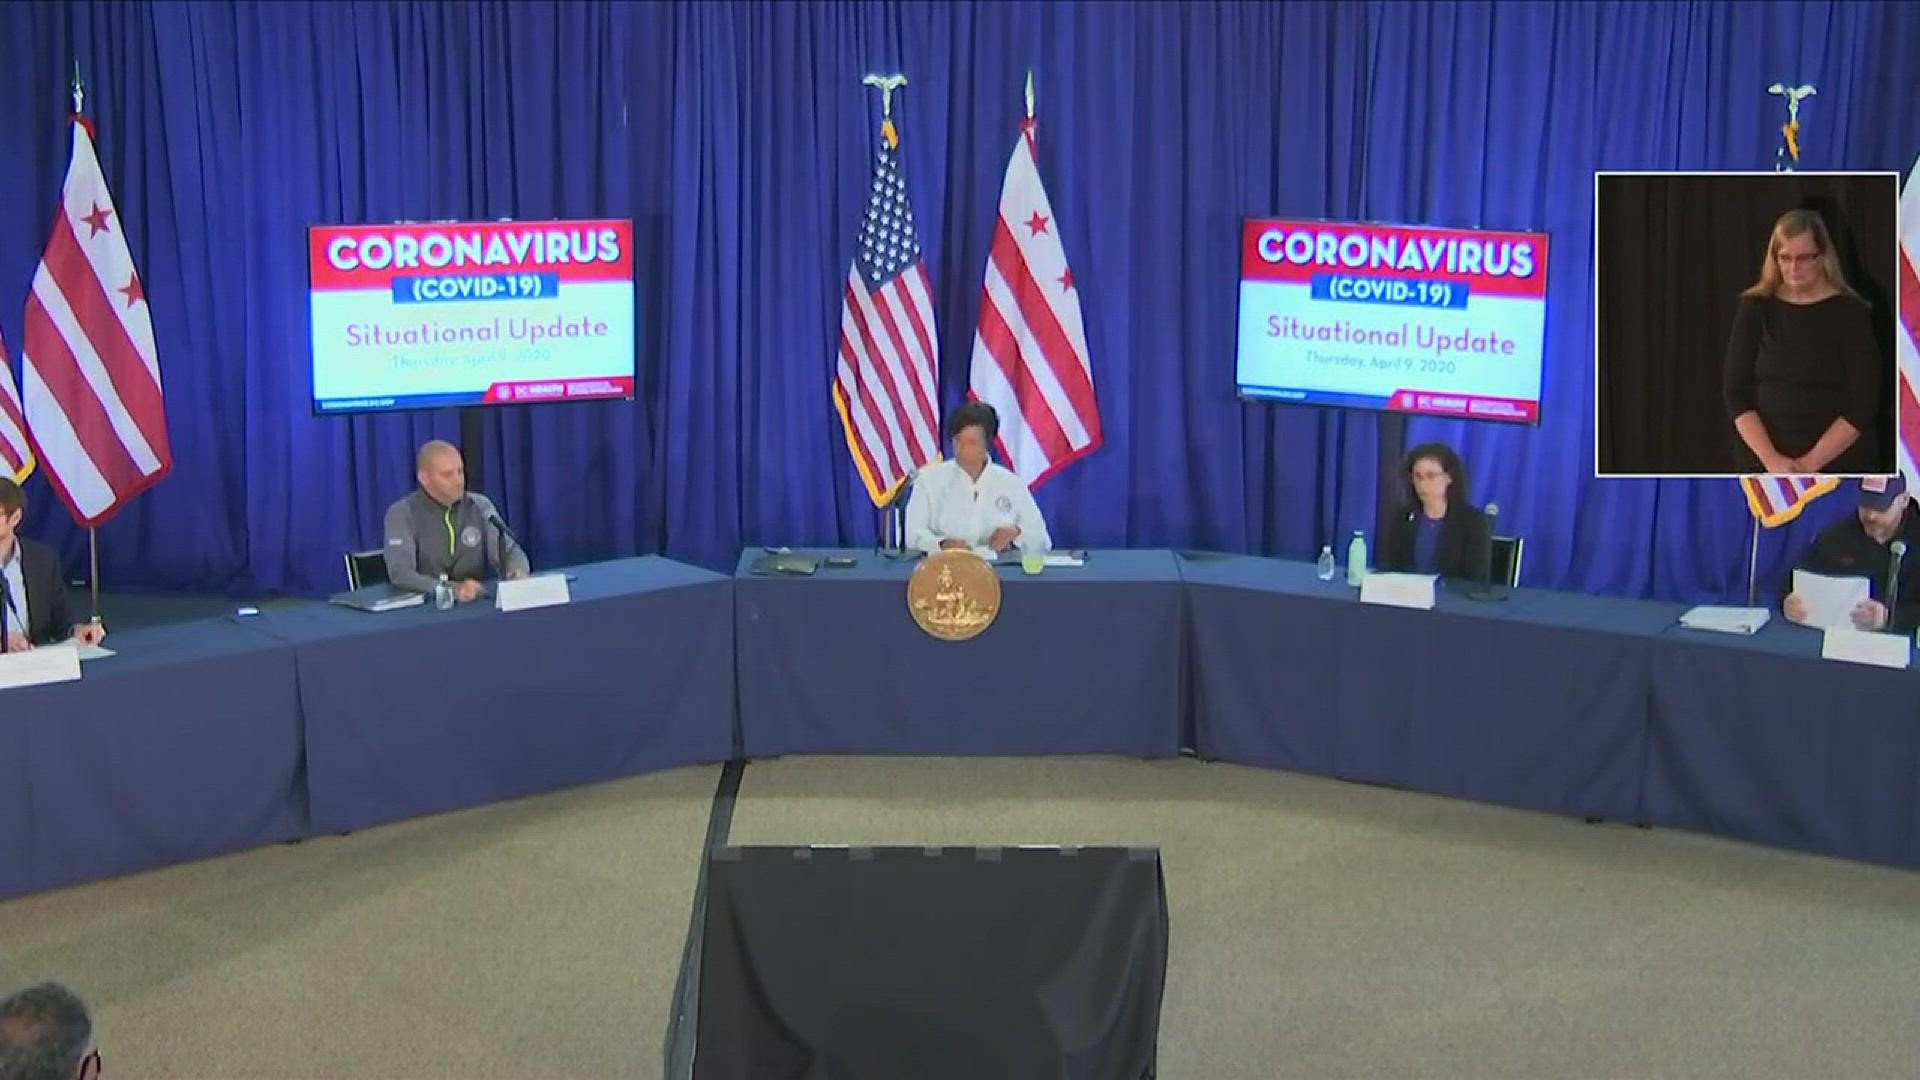 D.C. is working to make sure residents have access to healthy food and other essential supplies during the coronavirus outbreak.